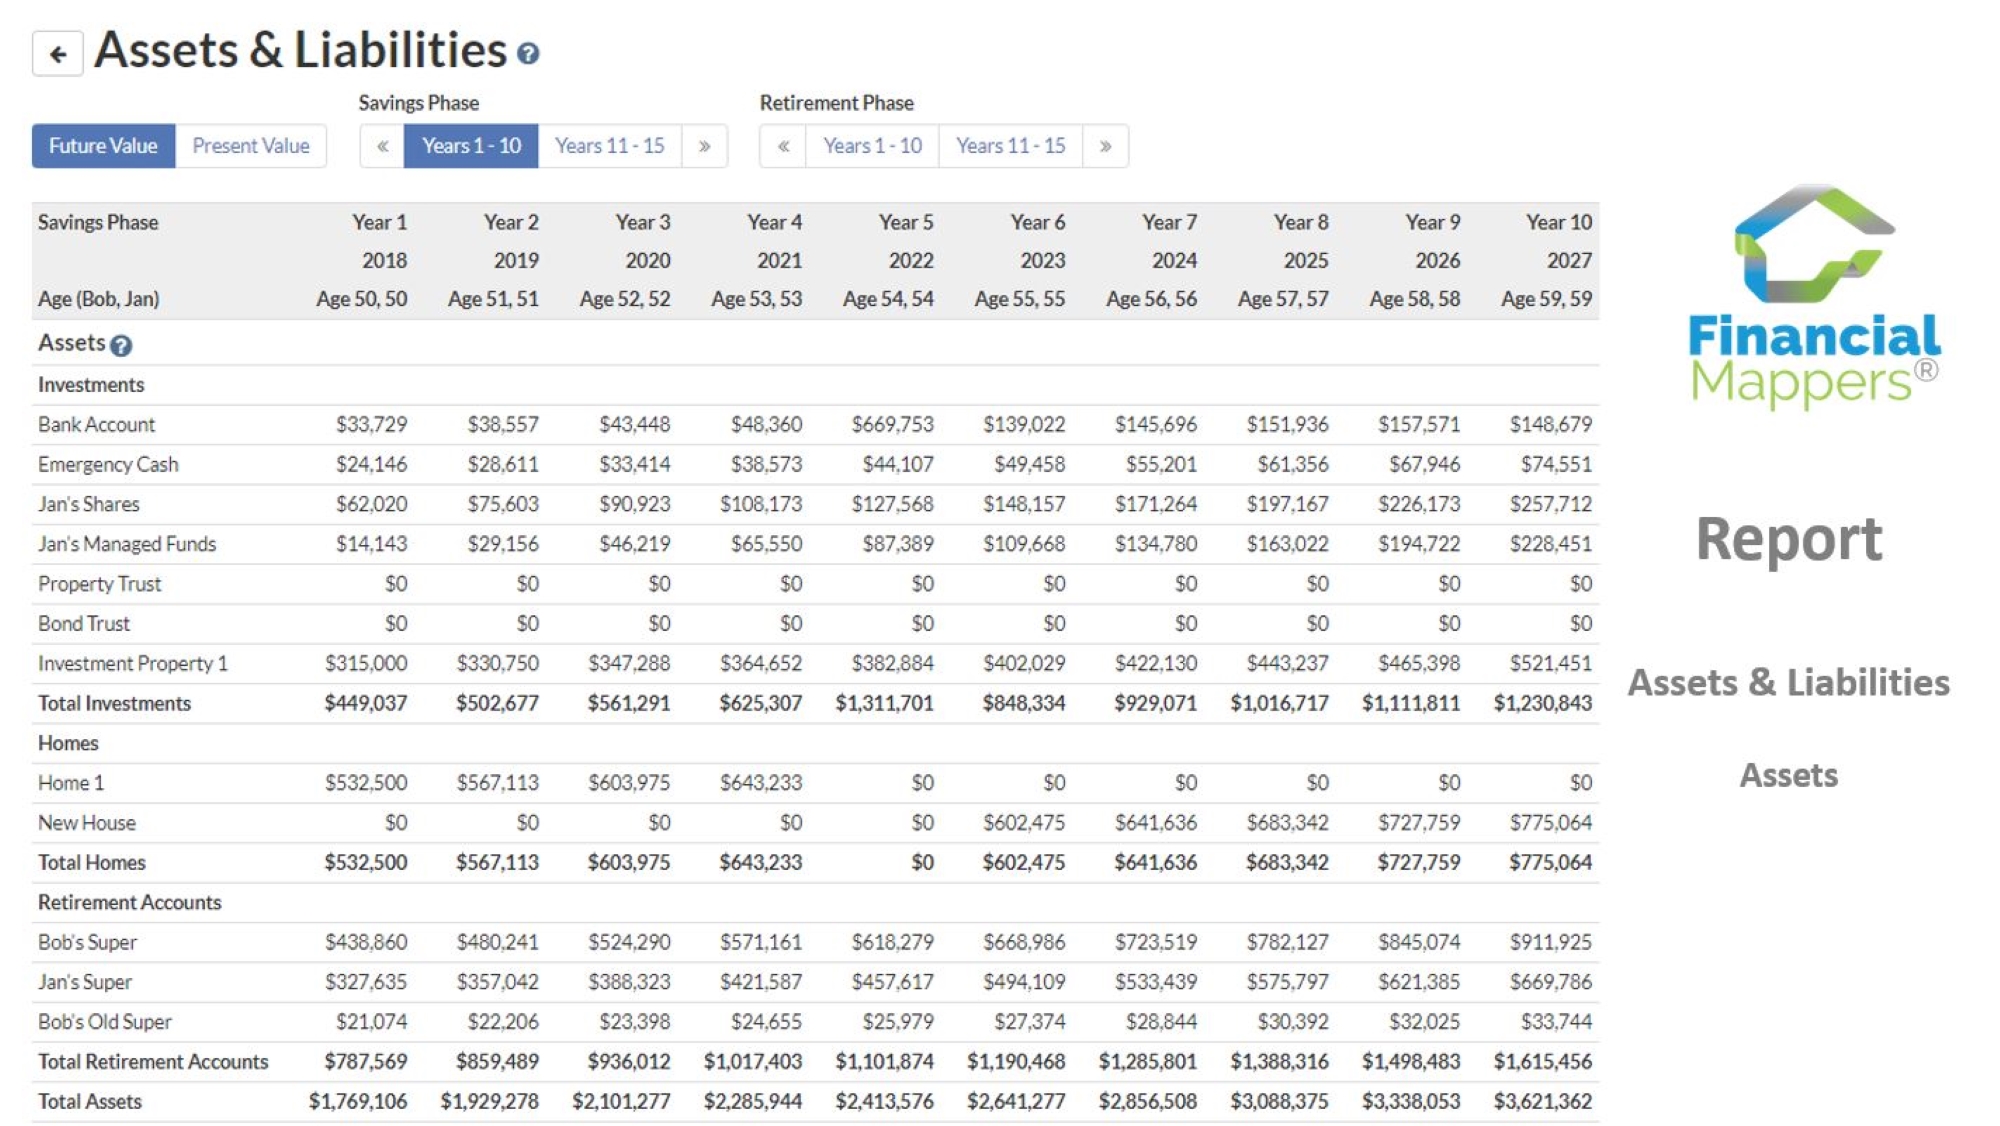 The Report, Assets and Liabilities displays the information in 10-yearly columns using present value and future value.